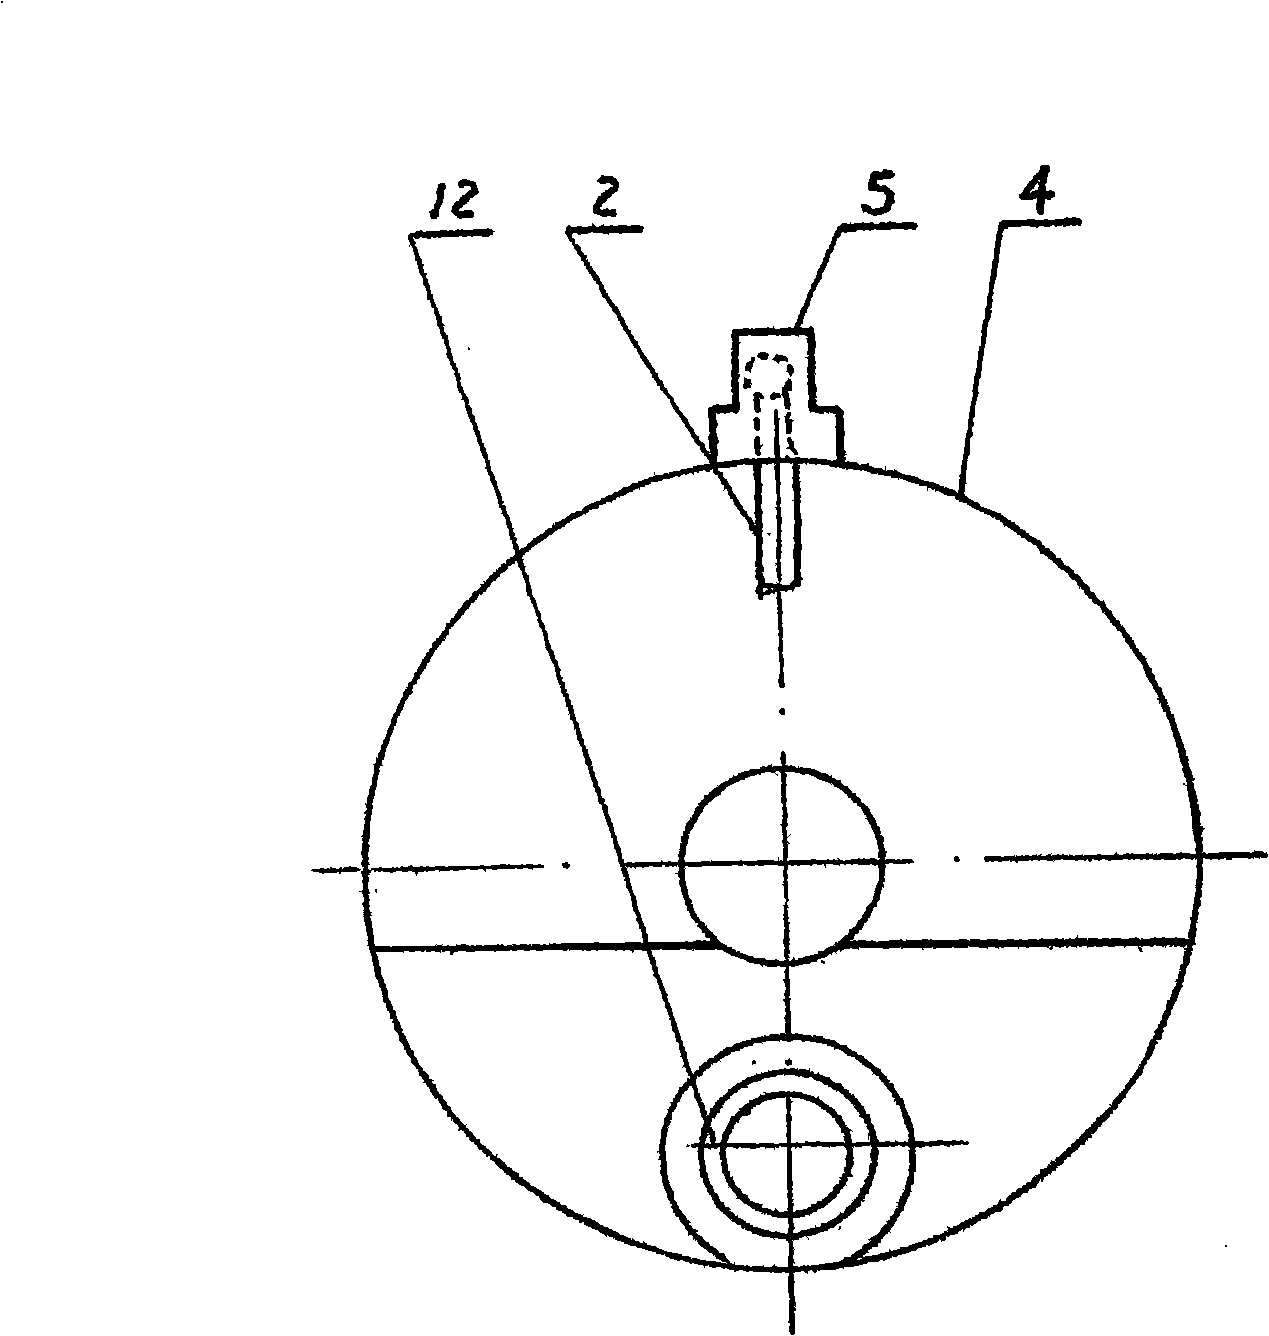 Automatic rotating water-injection double-face cleaning device